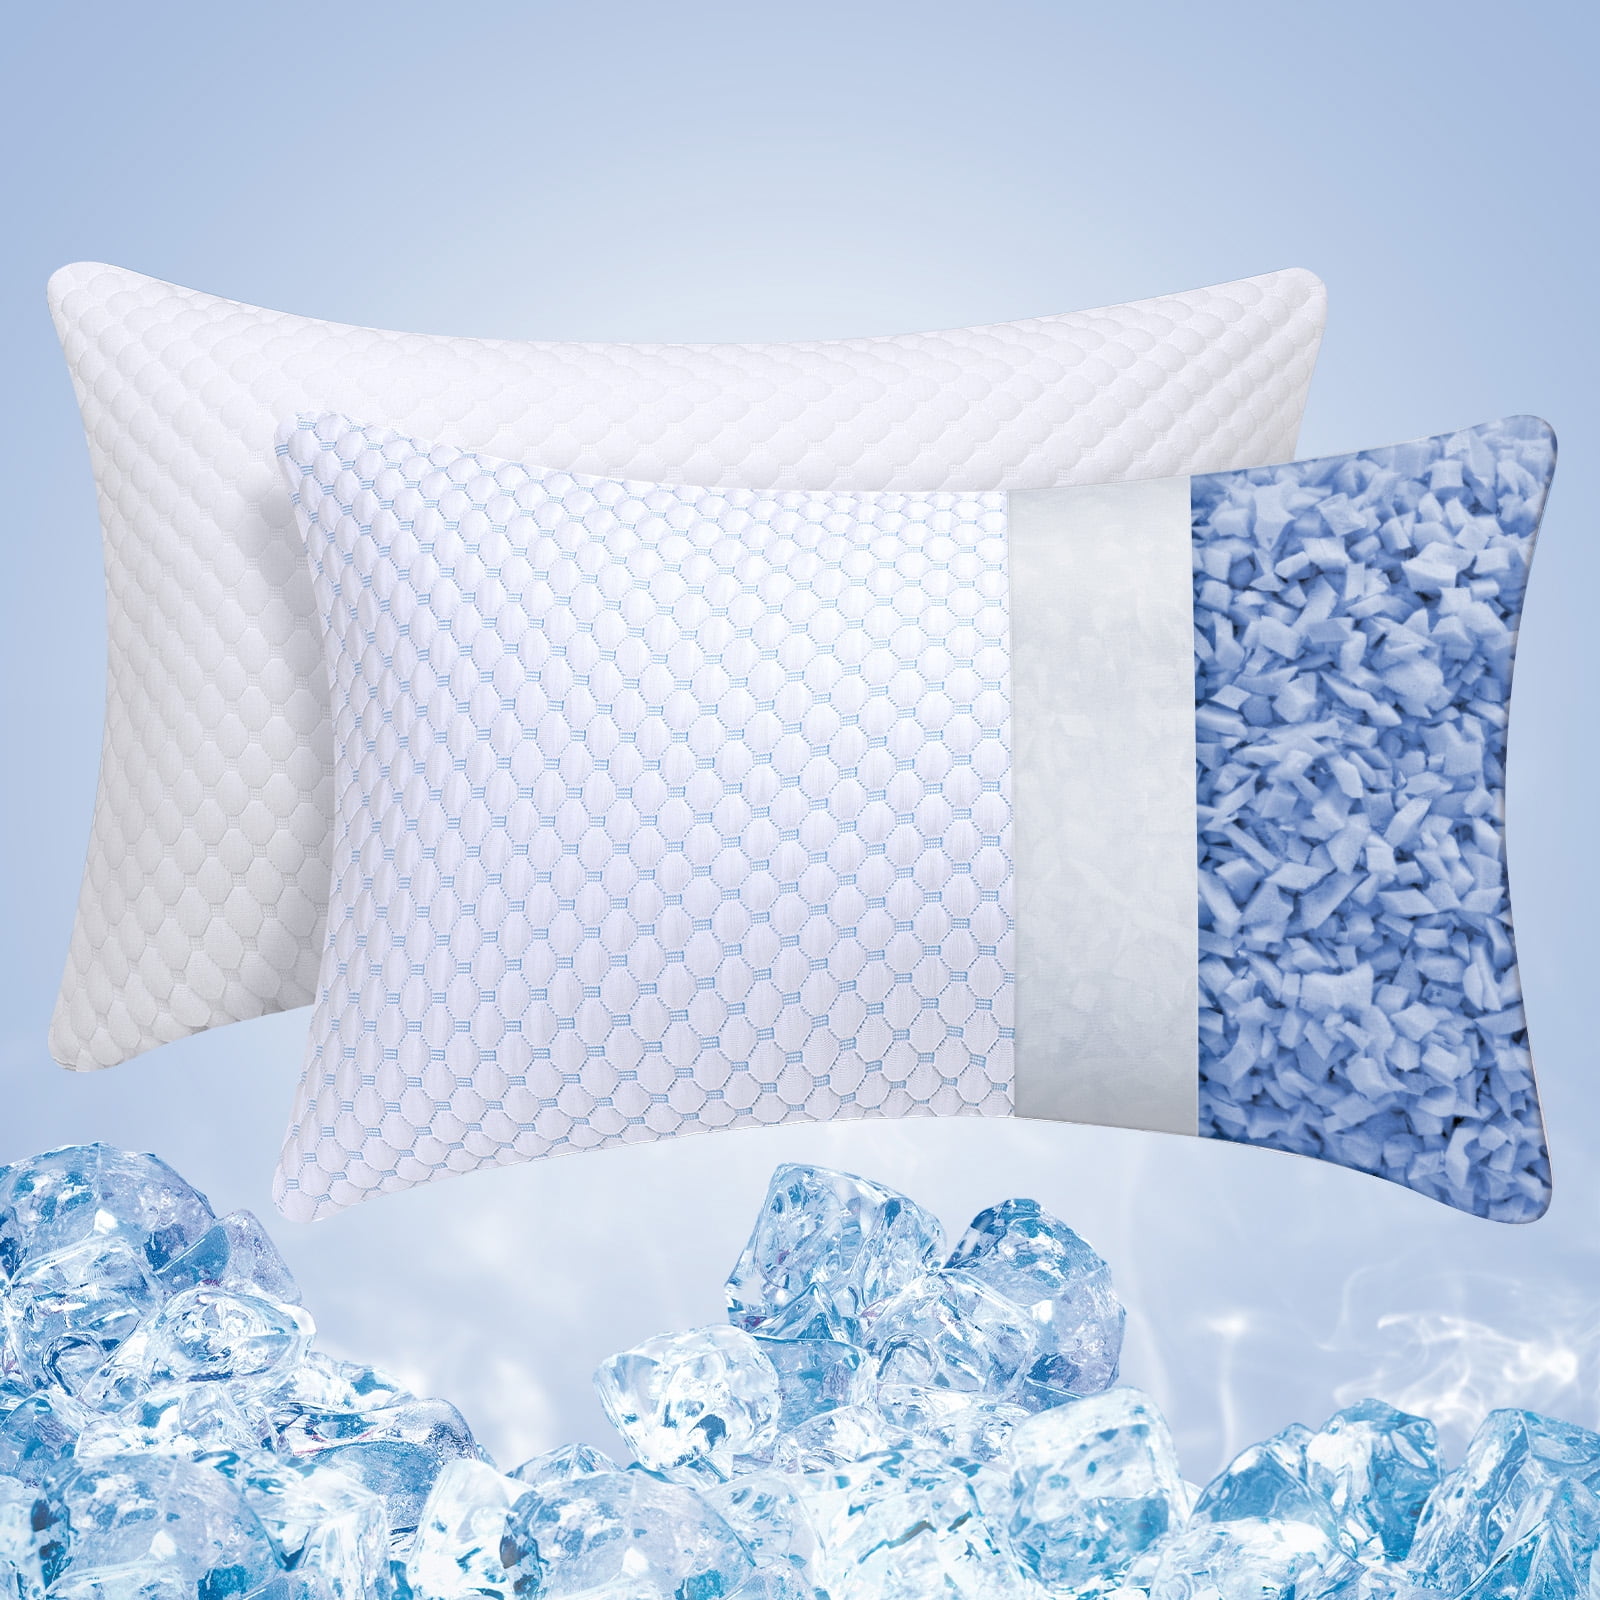 Shredded Memory Foam Pillows King Size Set of 2, Cooling Pillows